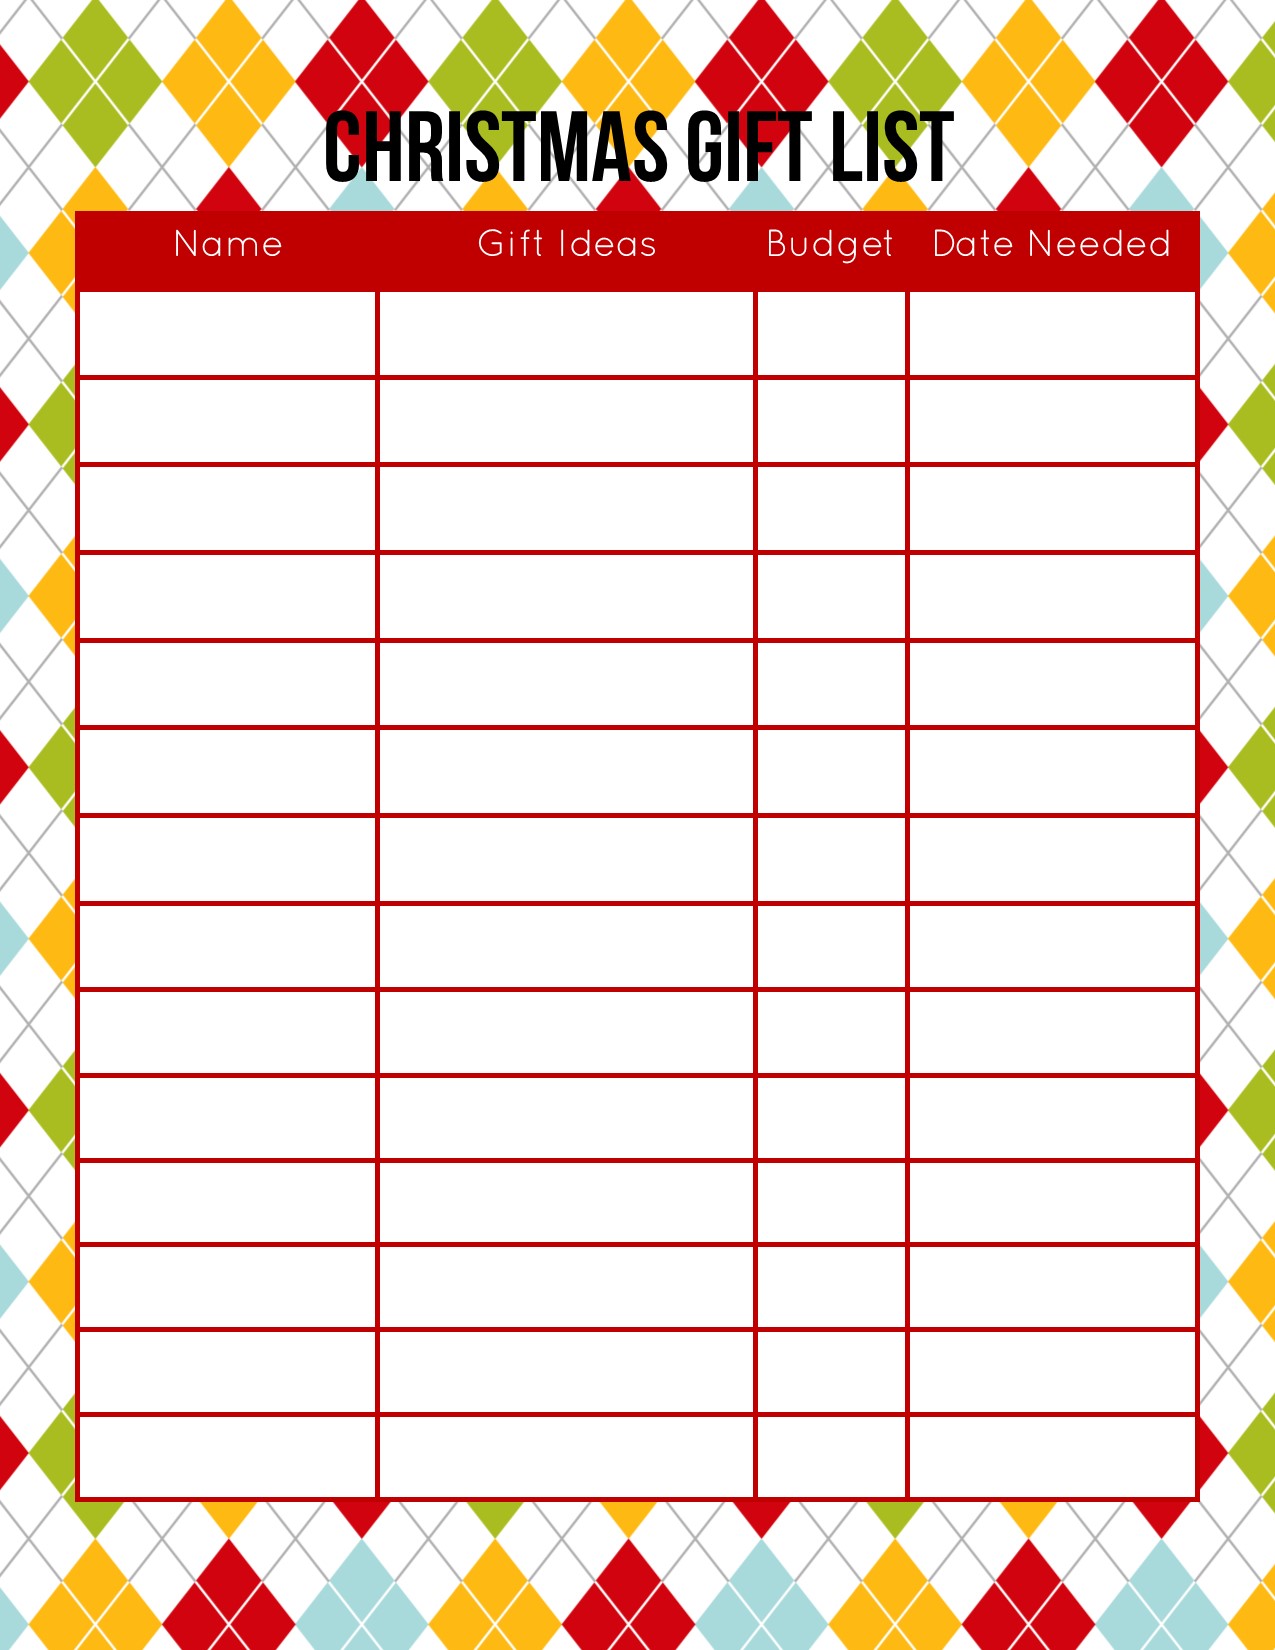 This Christmas Planner is a free download and has all you need to keep your holiday organized - print it out and use it year after year!